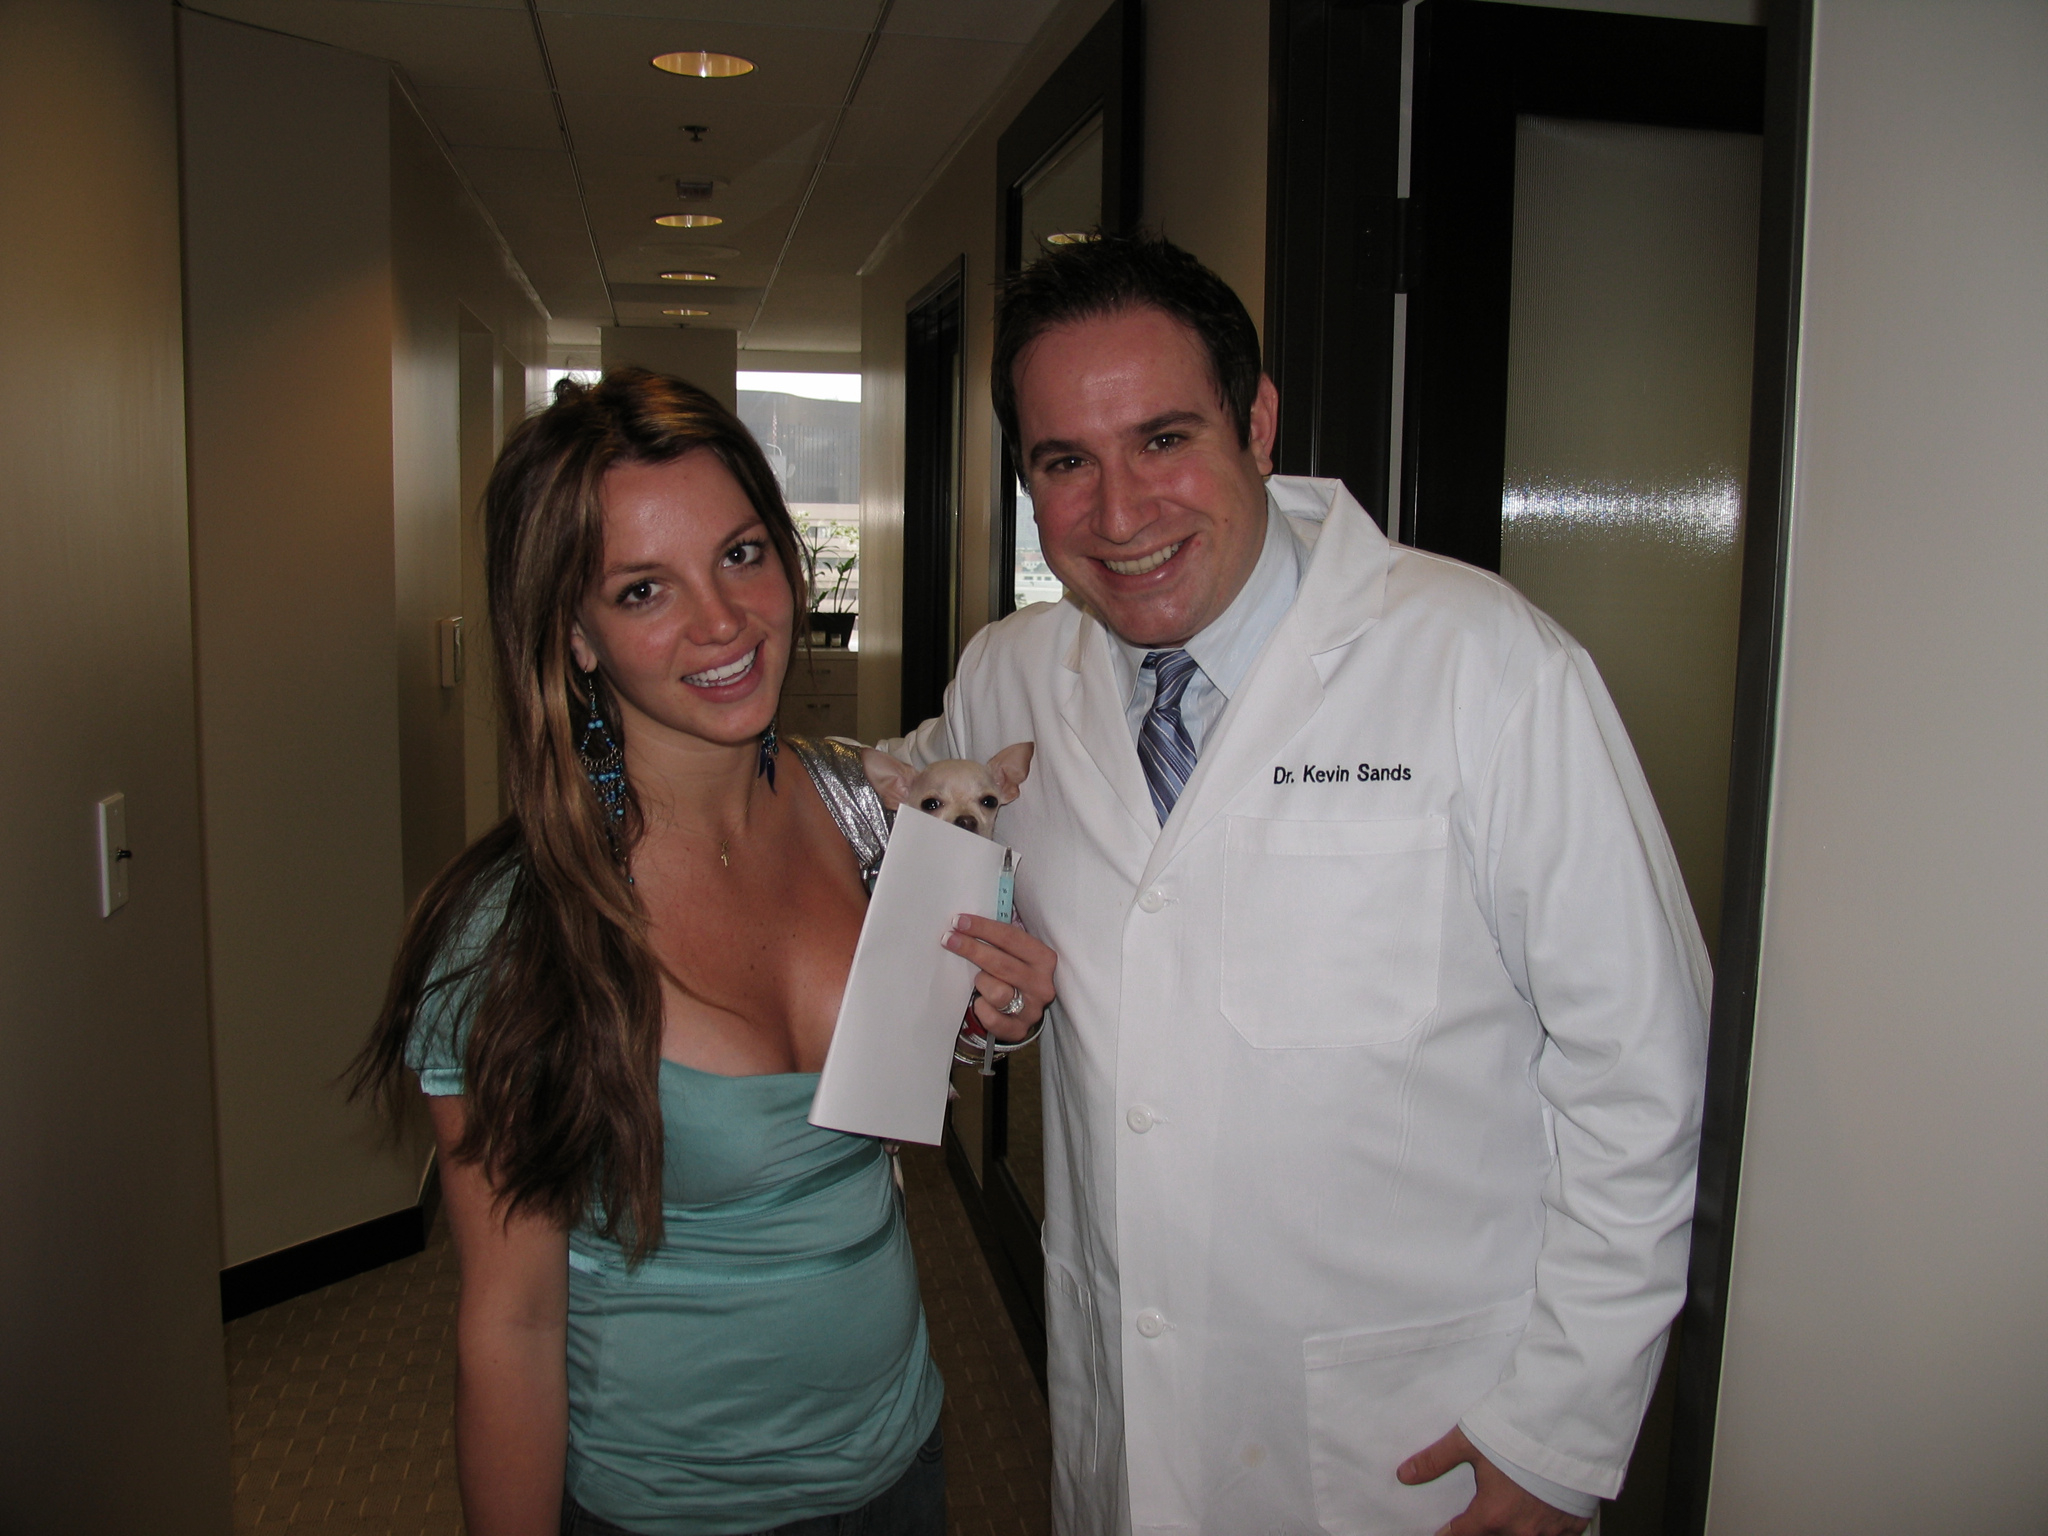 Dr. Kevin Sands with Britney Spears